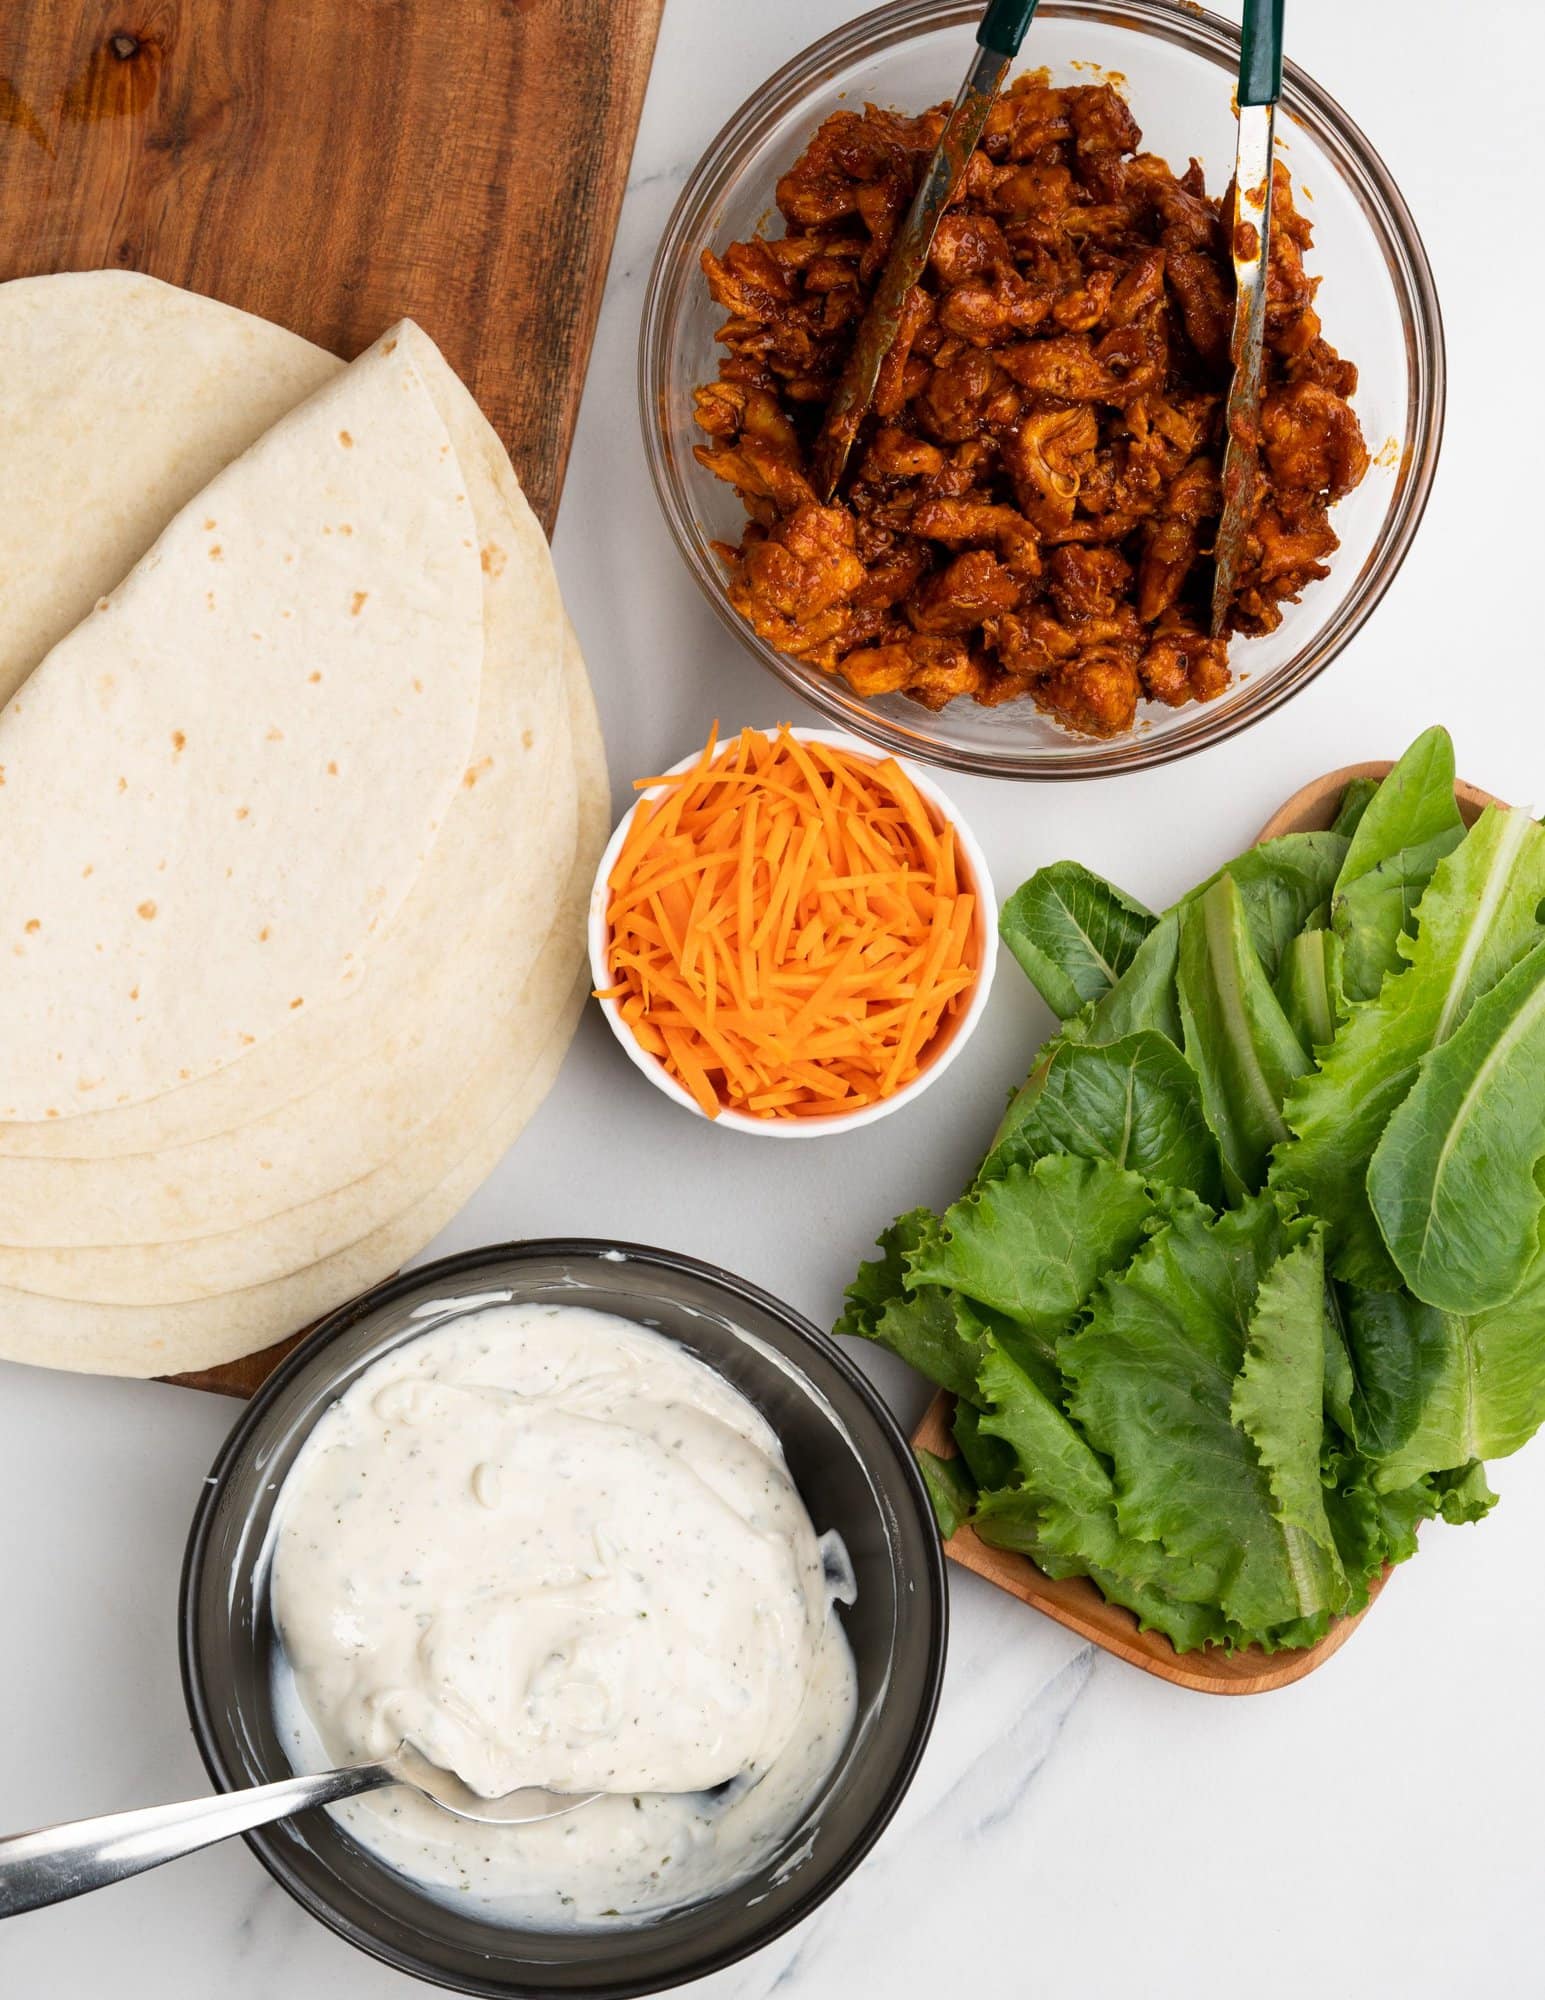 You need flour tortilla, spicy buffalo chicken filling, salad greens, carrots and creamy ranch dressing for buffalo chicken wrap. 